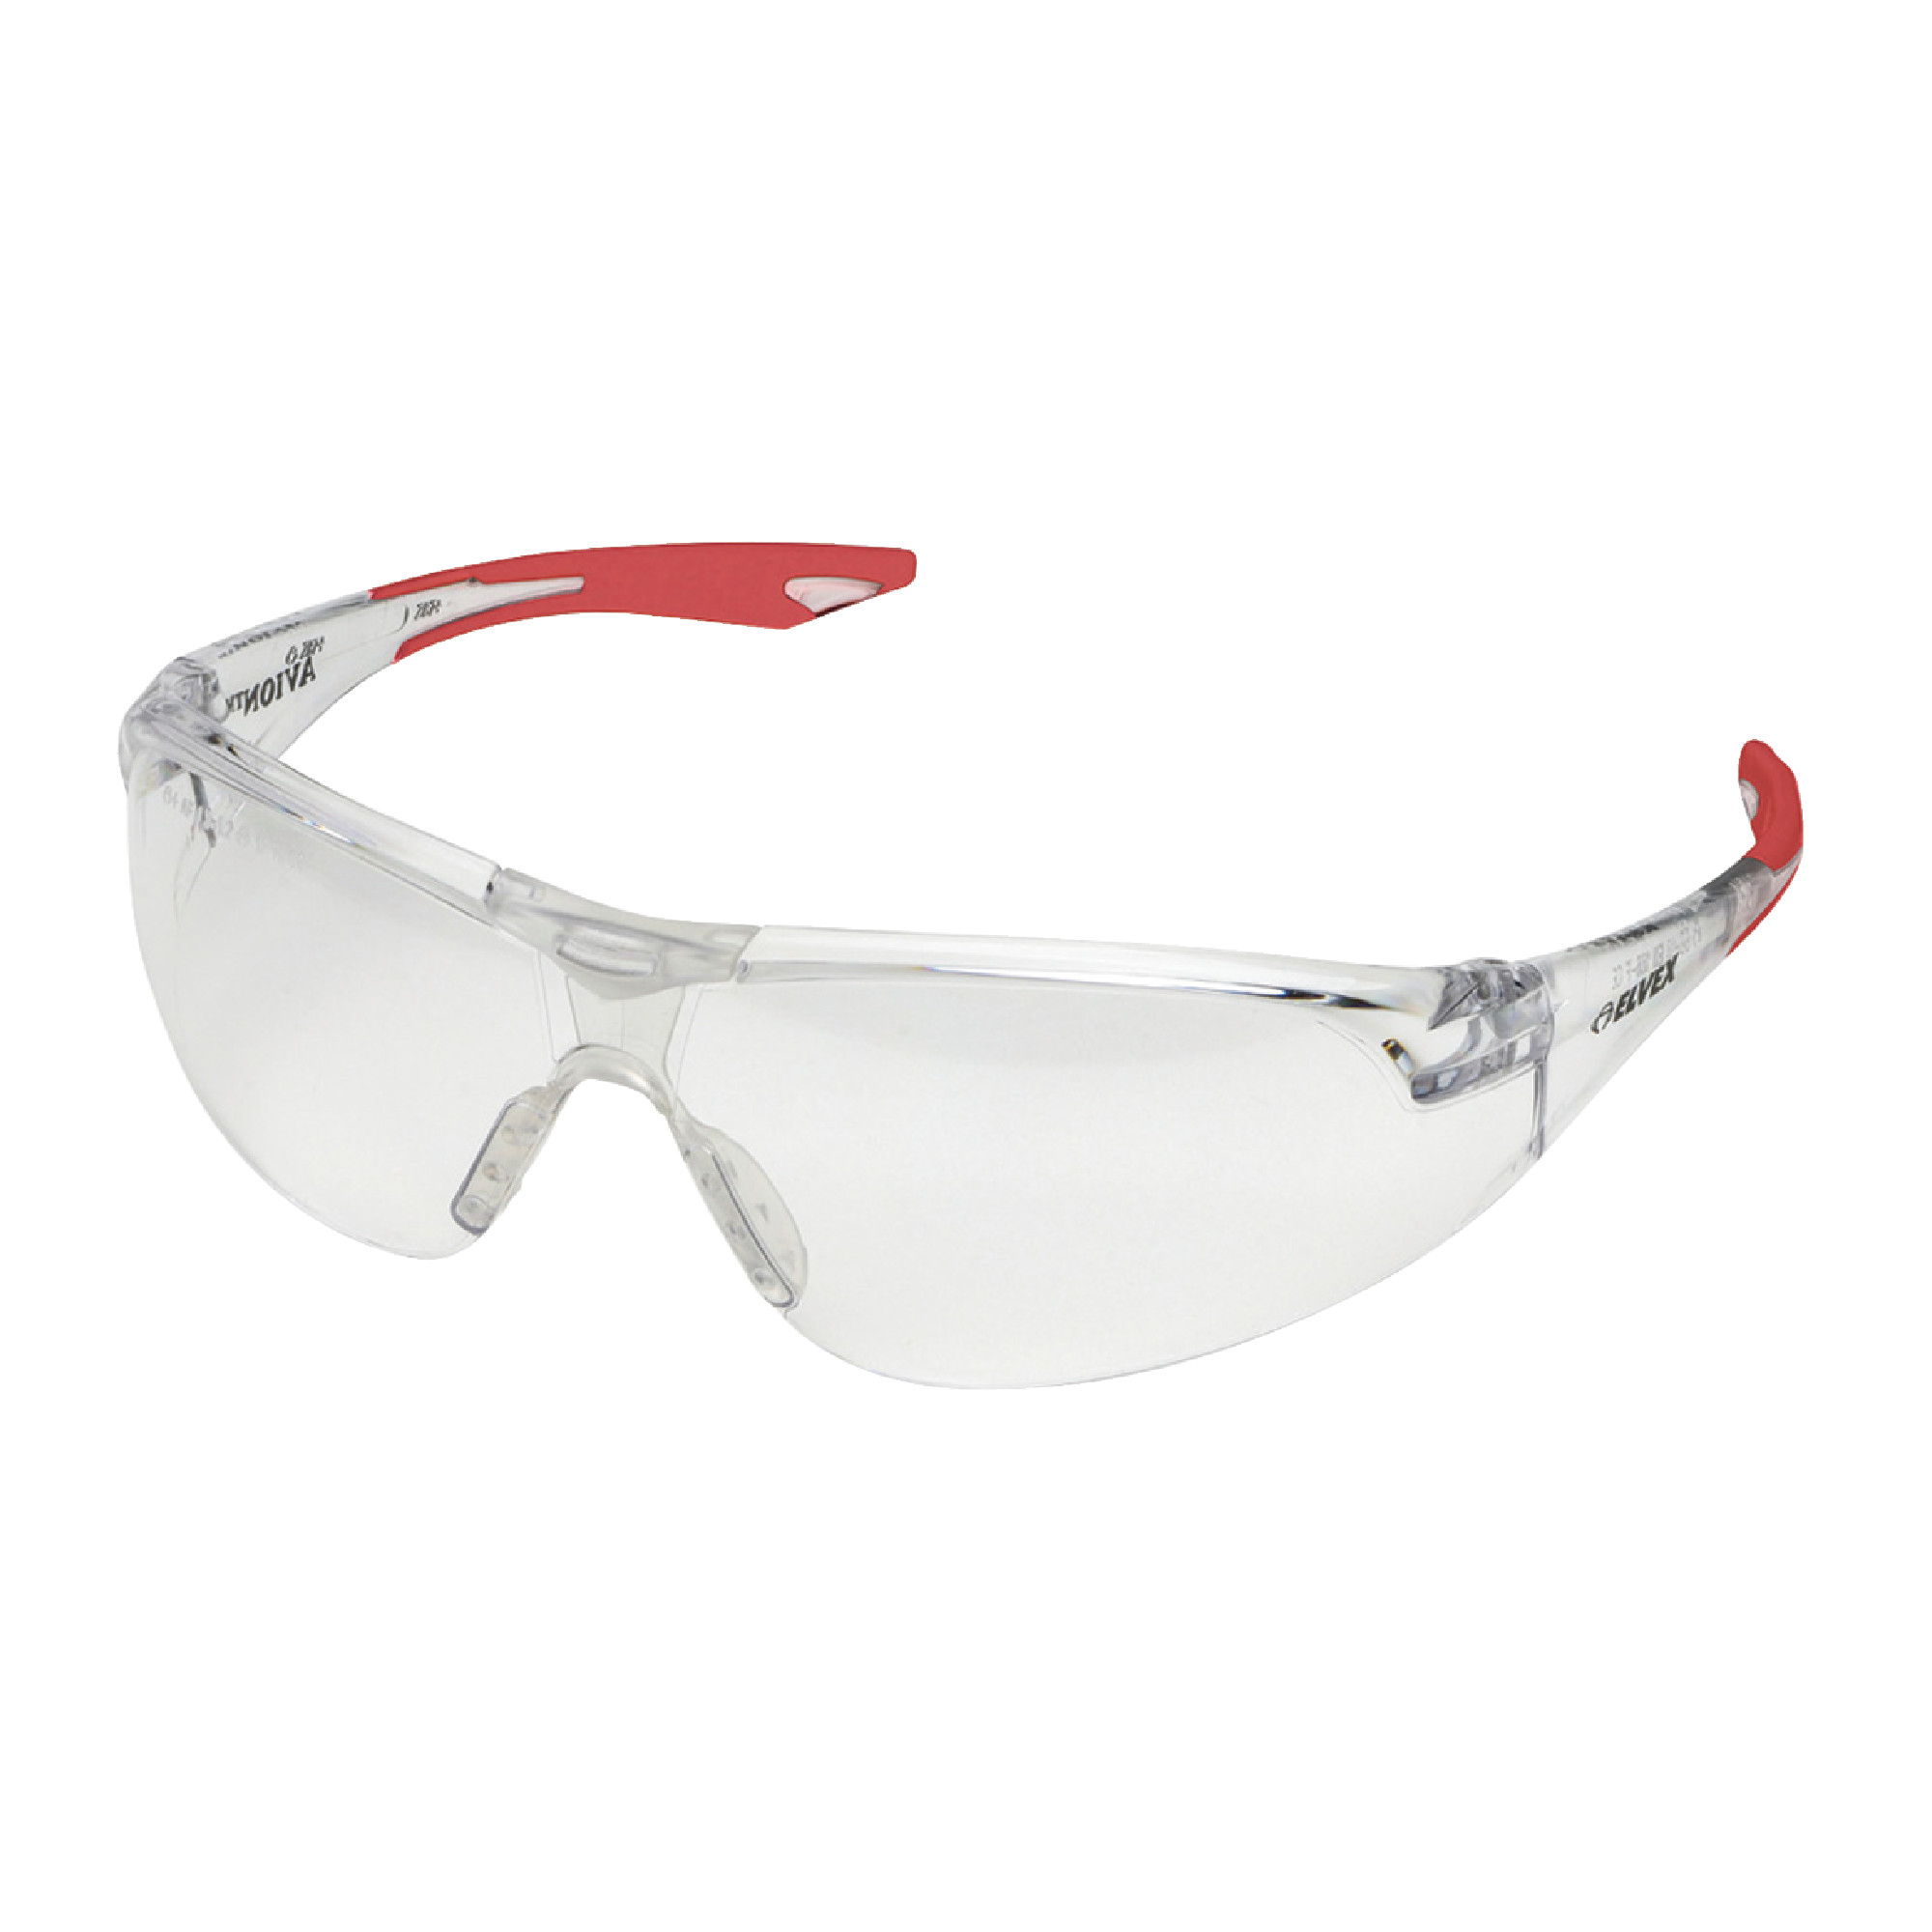 ELVEX Avion Clear Lens Safety Glasses With Anti-Fog Coating